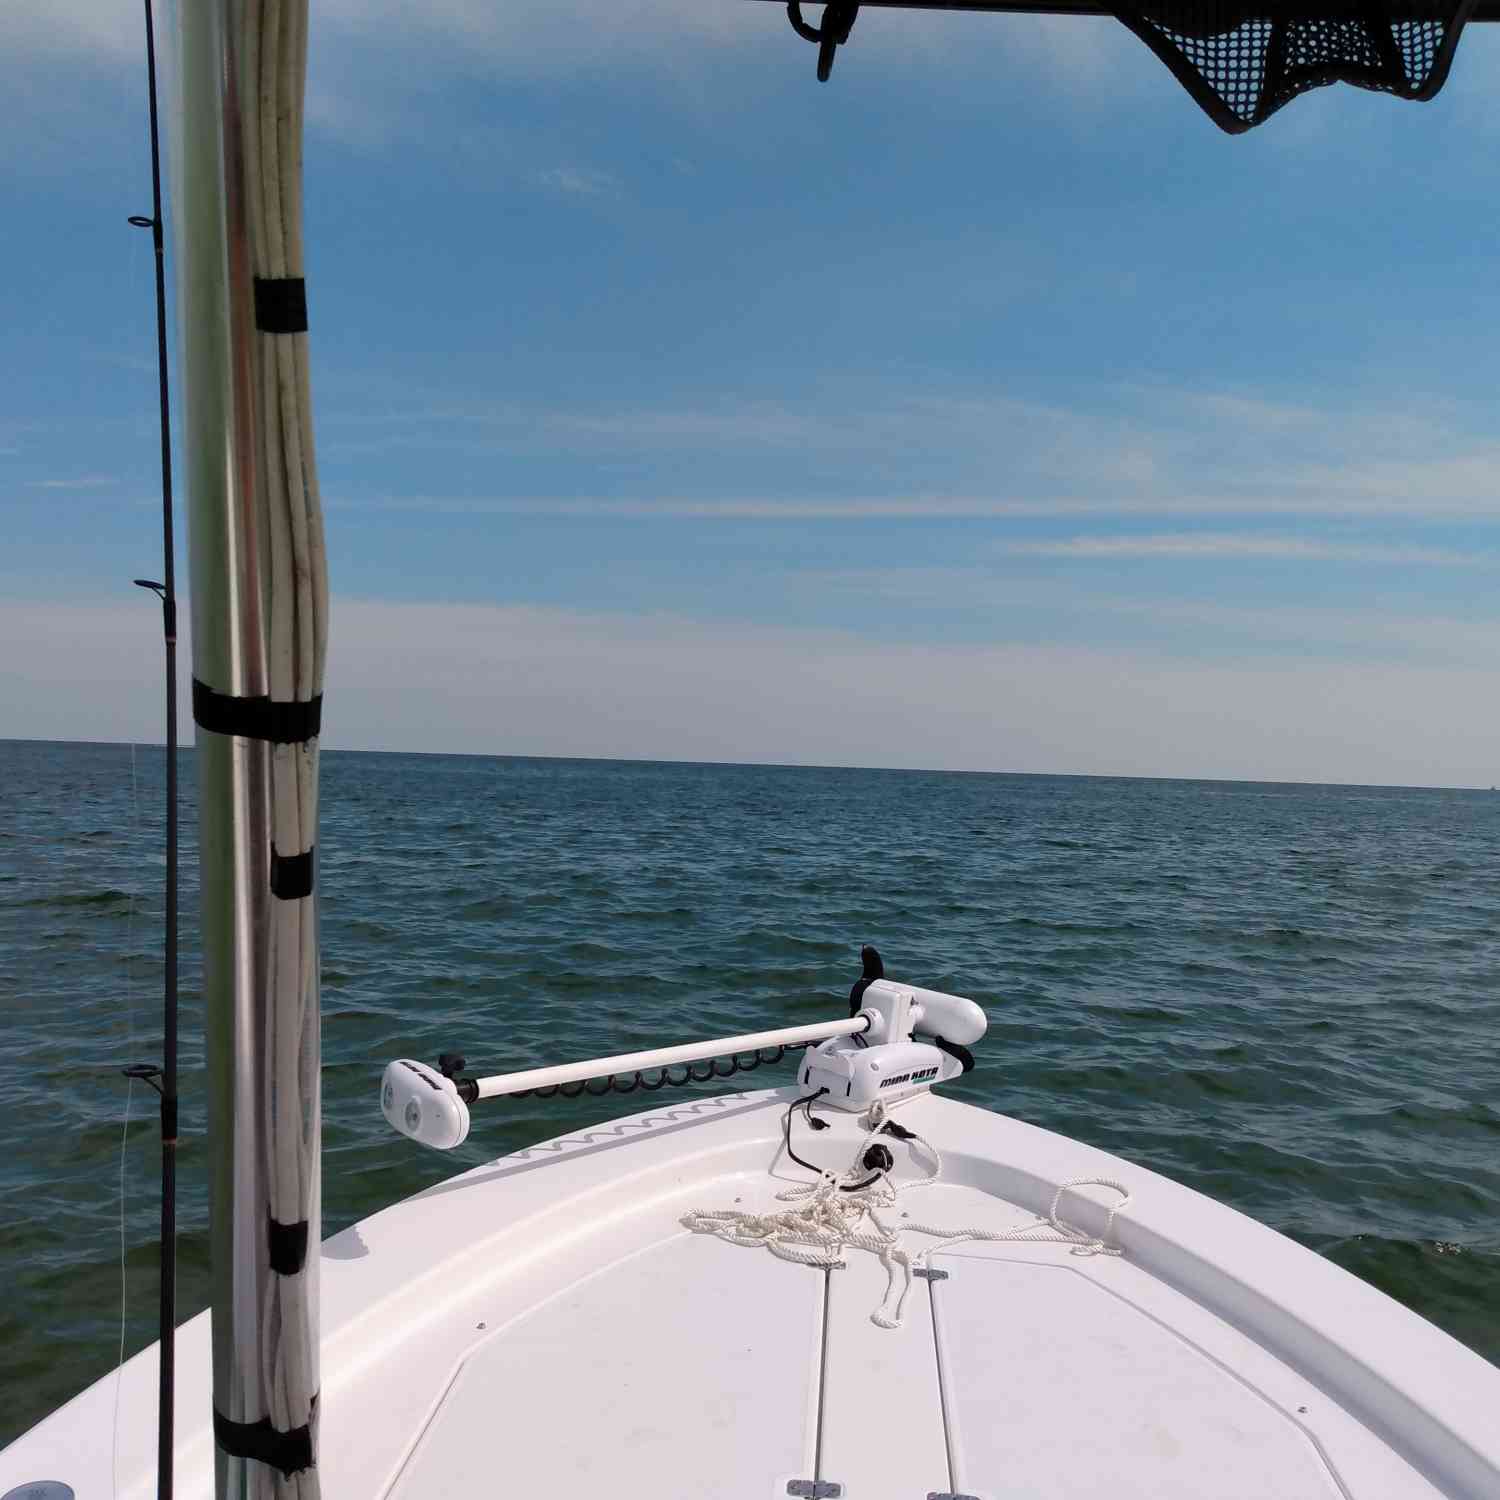 Bow shot. I'm recently the proud owner of a 2017 20 island bay. Over all I love the boat. I hav...